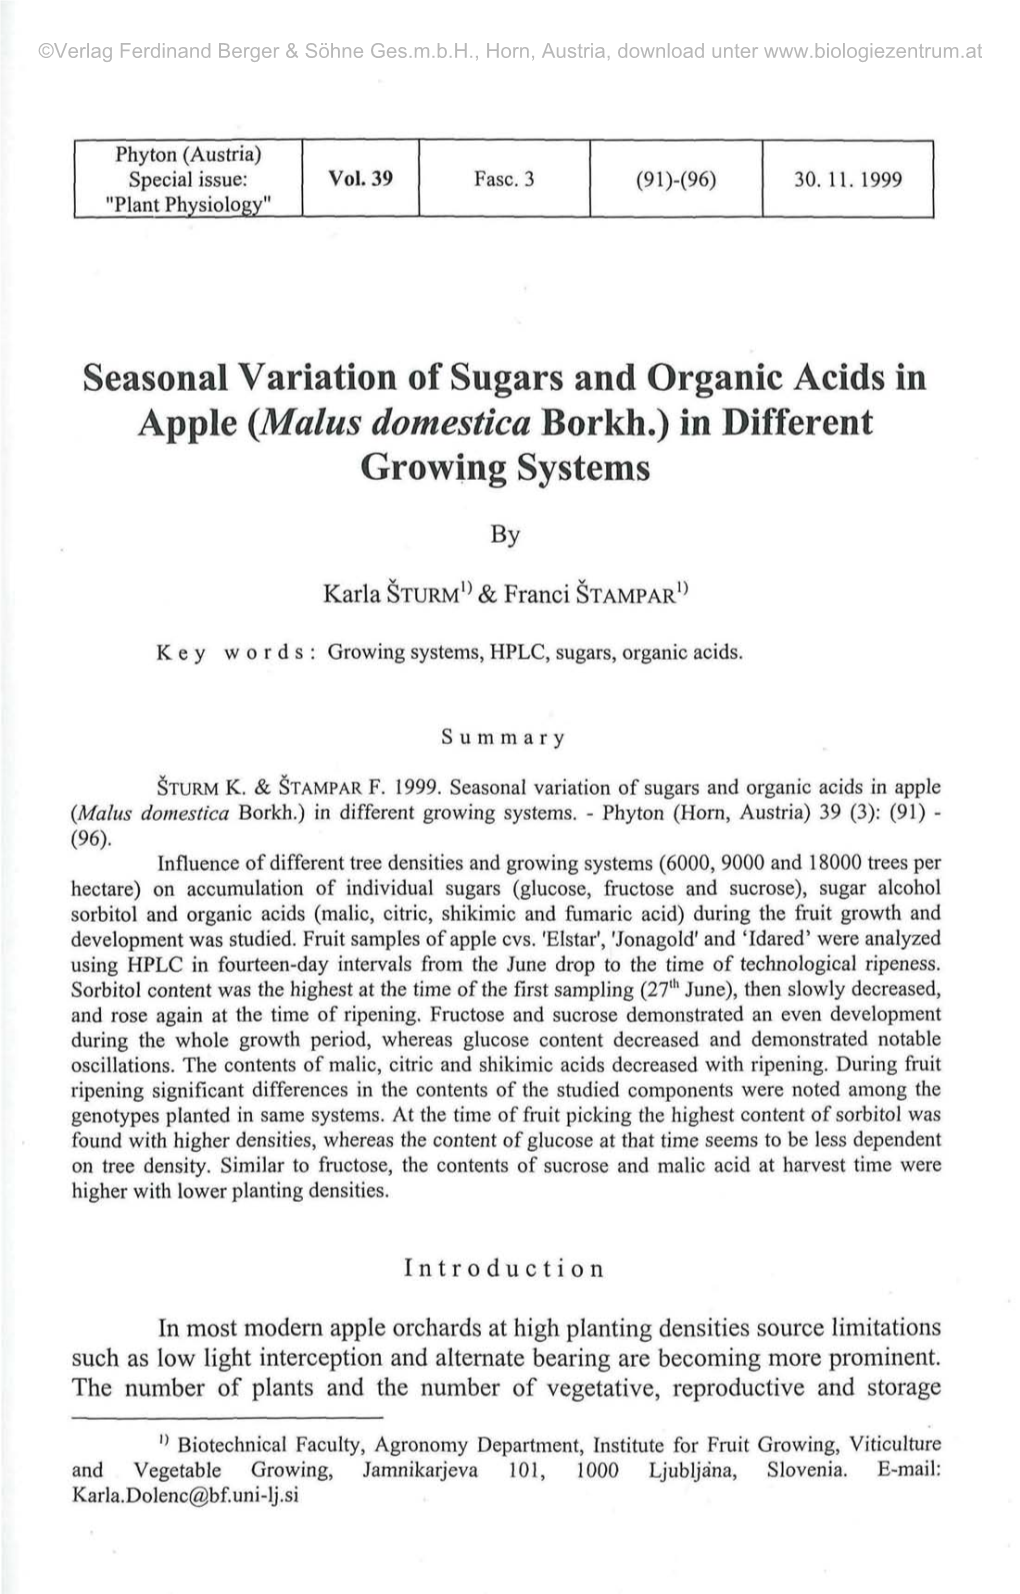 Seasonal Variation of Sugars and Organic Acids in Apple (Malus Domestica Borkh.) in Different Growing Systems